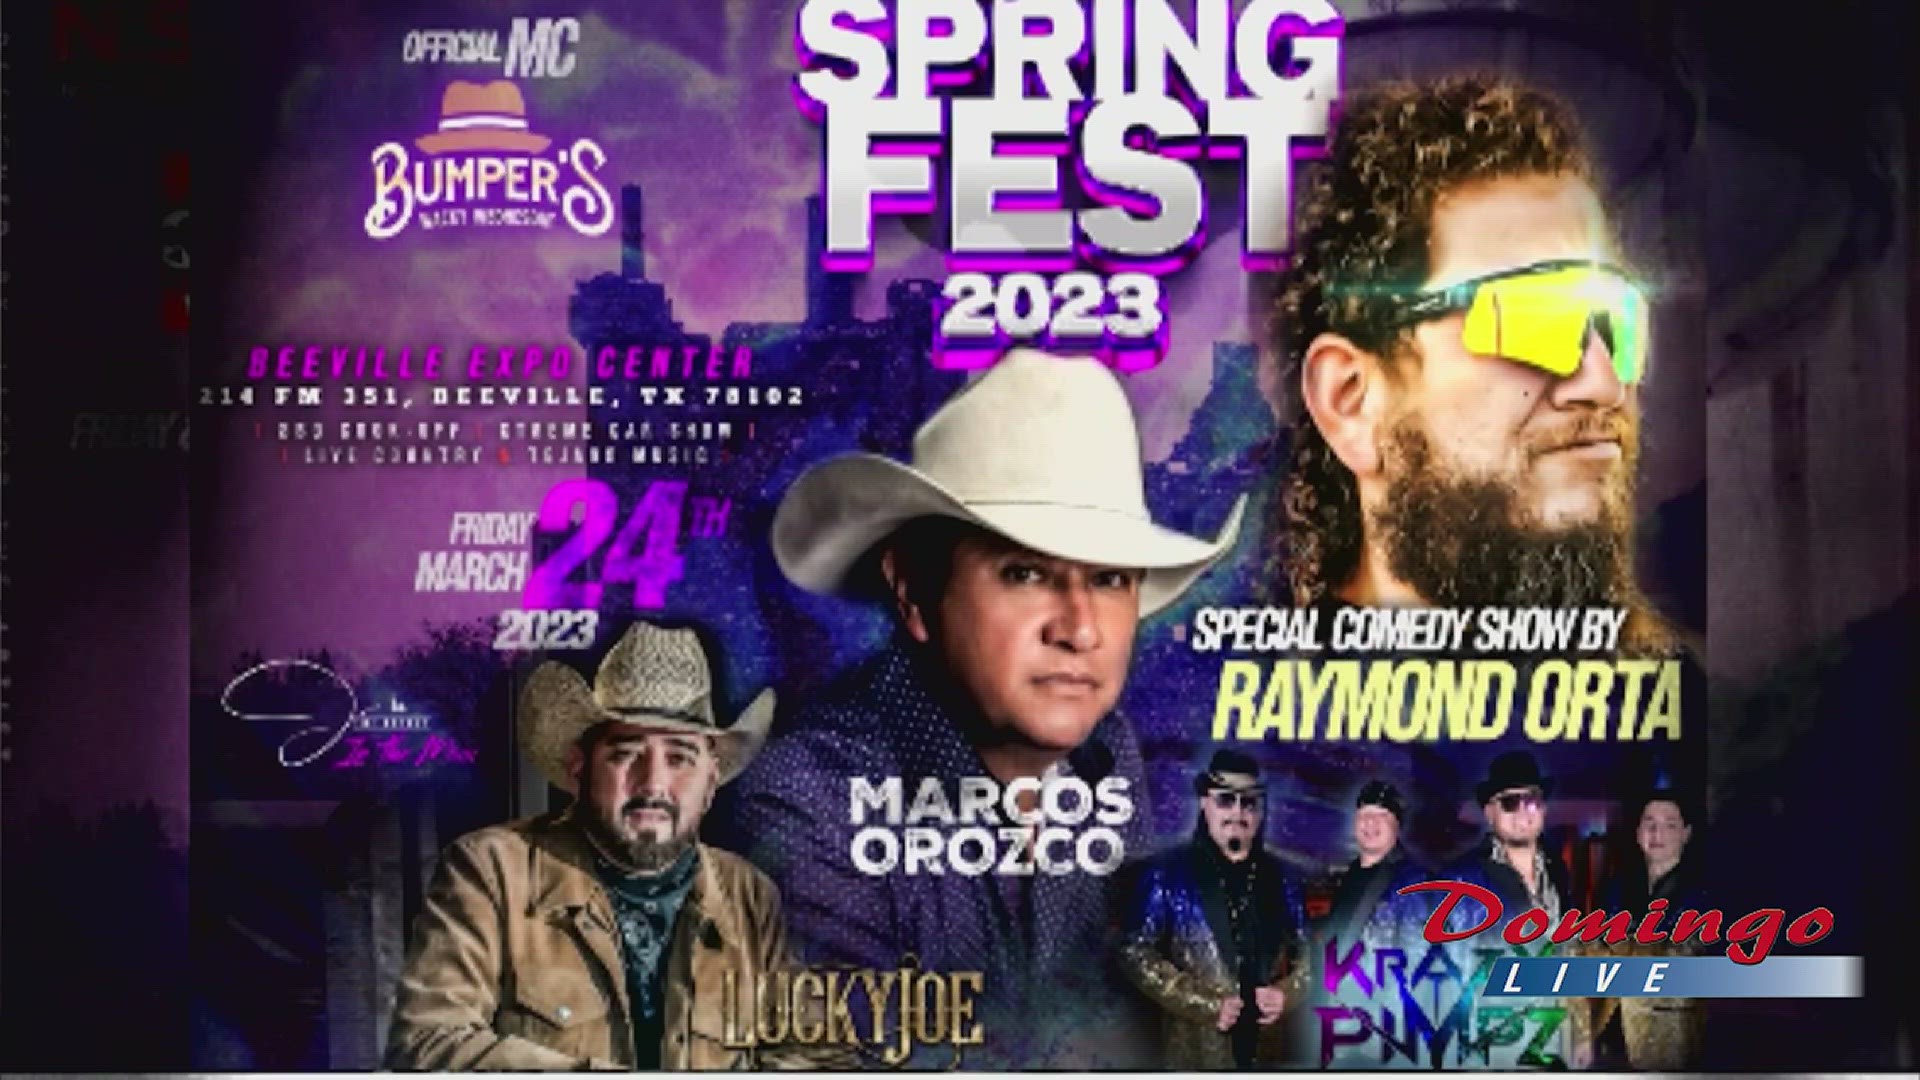 Beeville is gearing up to host Spring Fest 2023, which will feature a parade, vendors, live music and a barbecue contest.